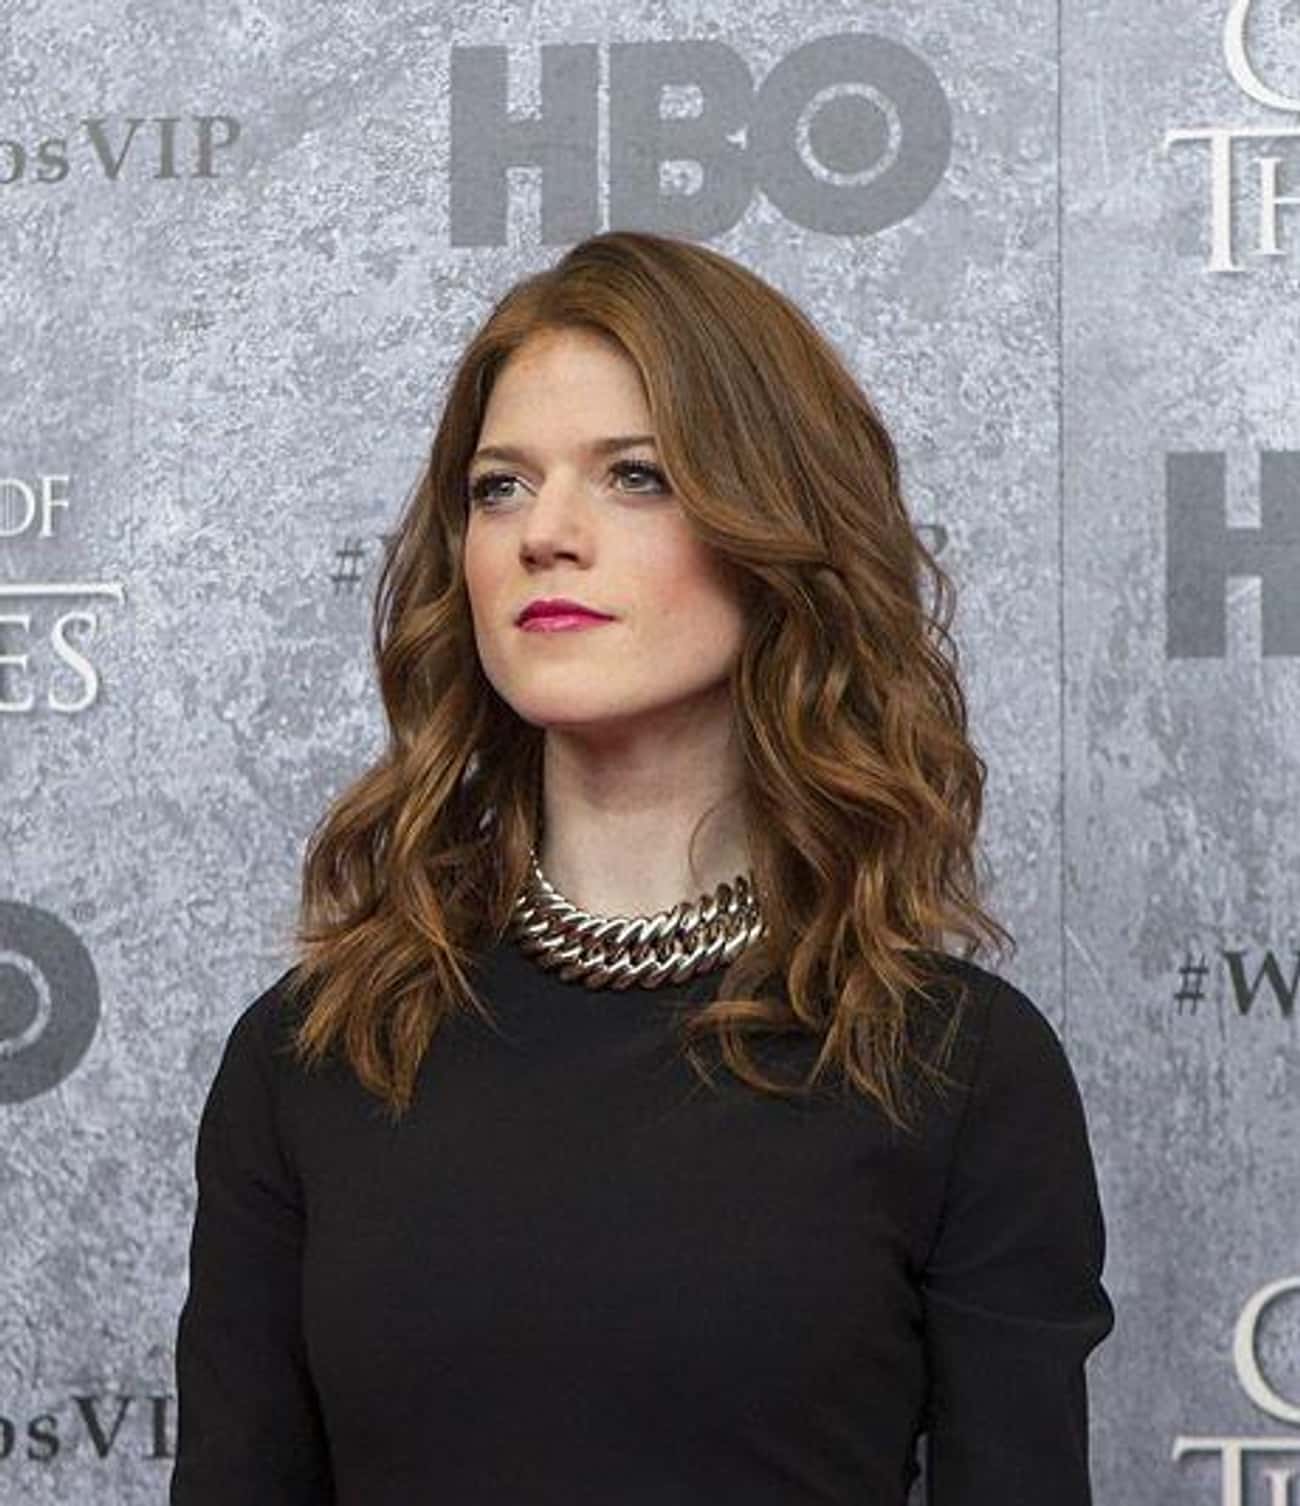 Rose Leslie Was Born in a Real Castle